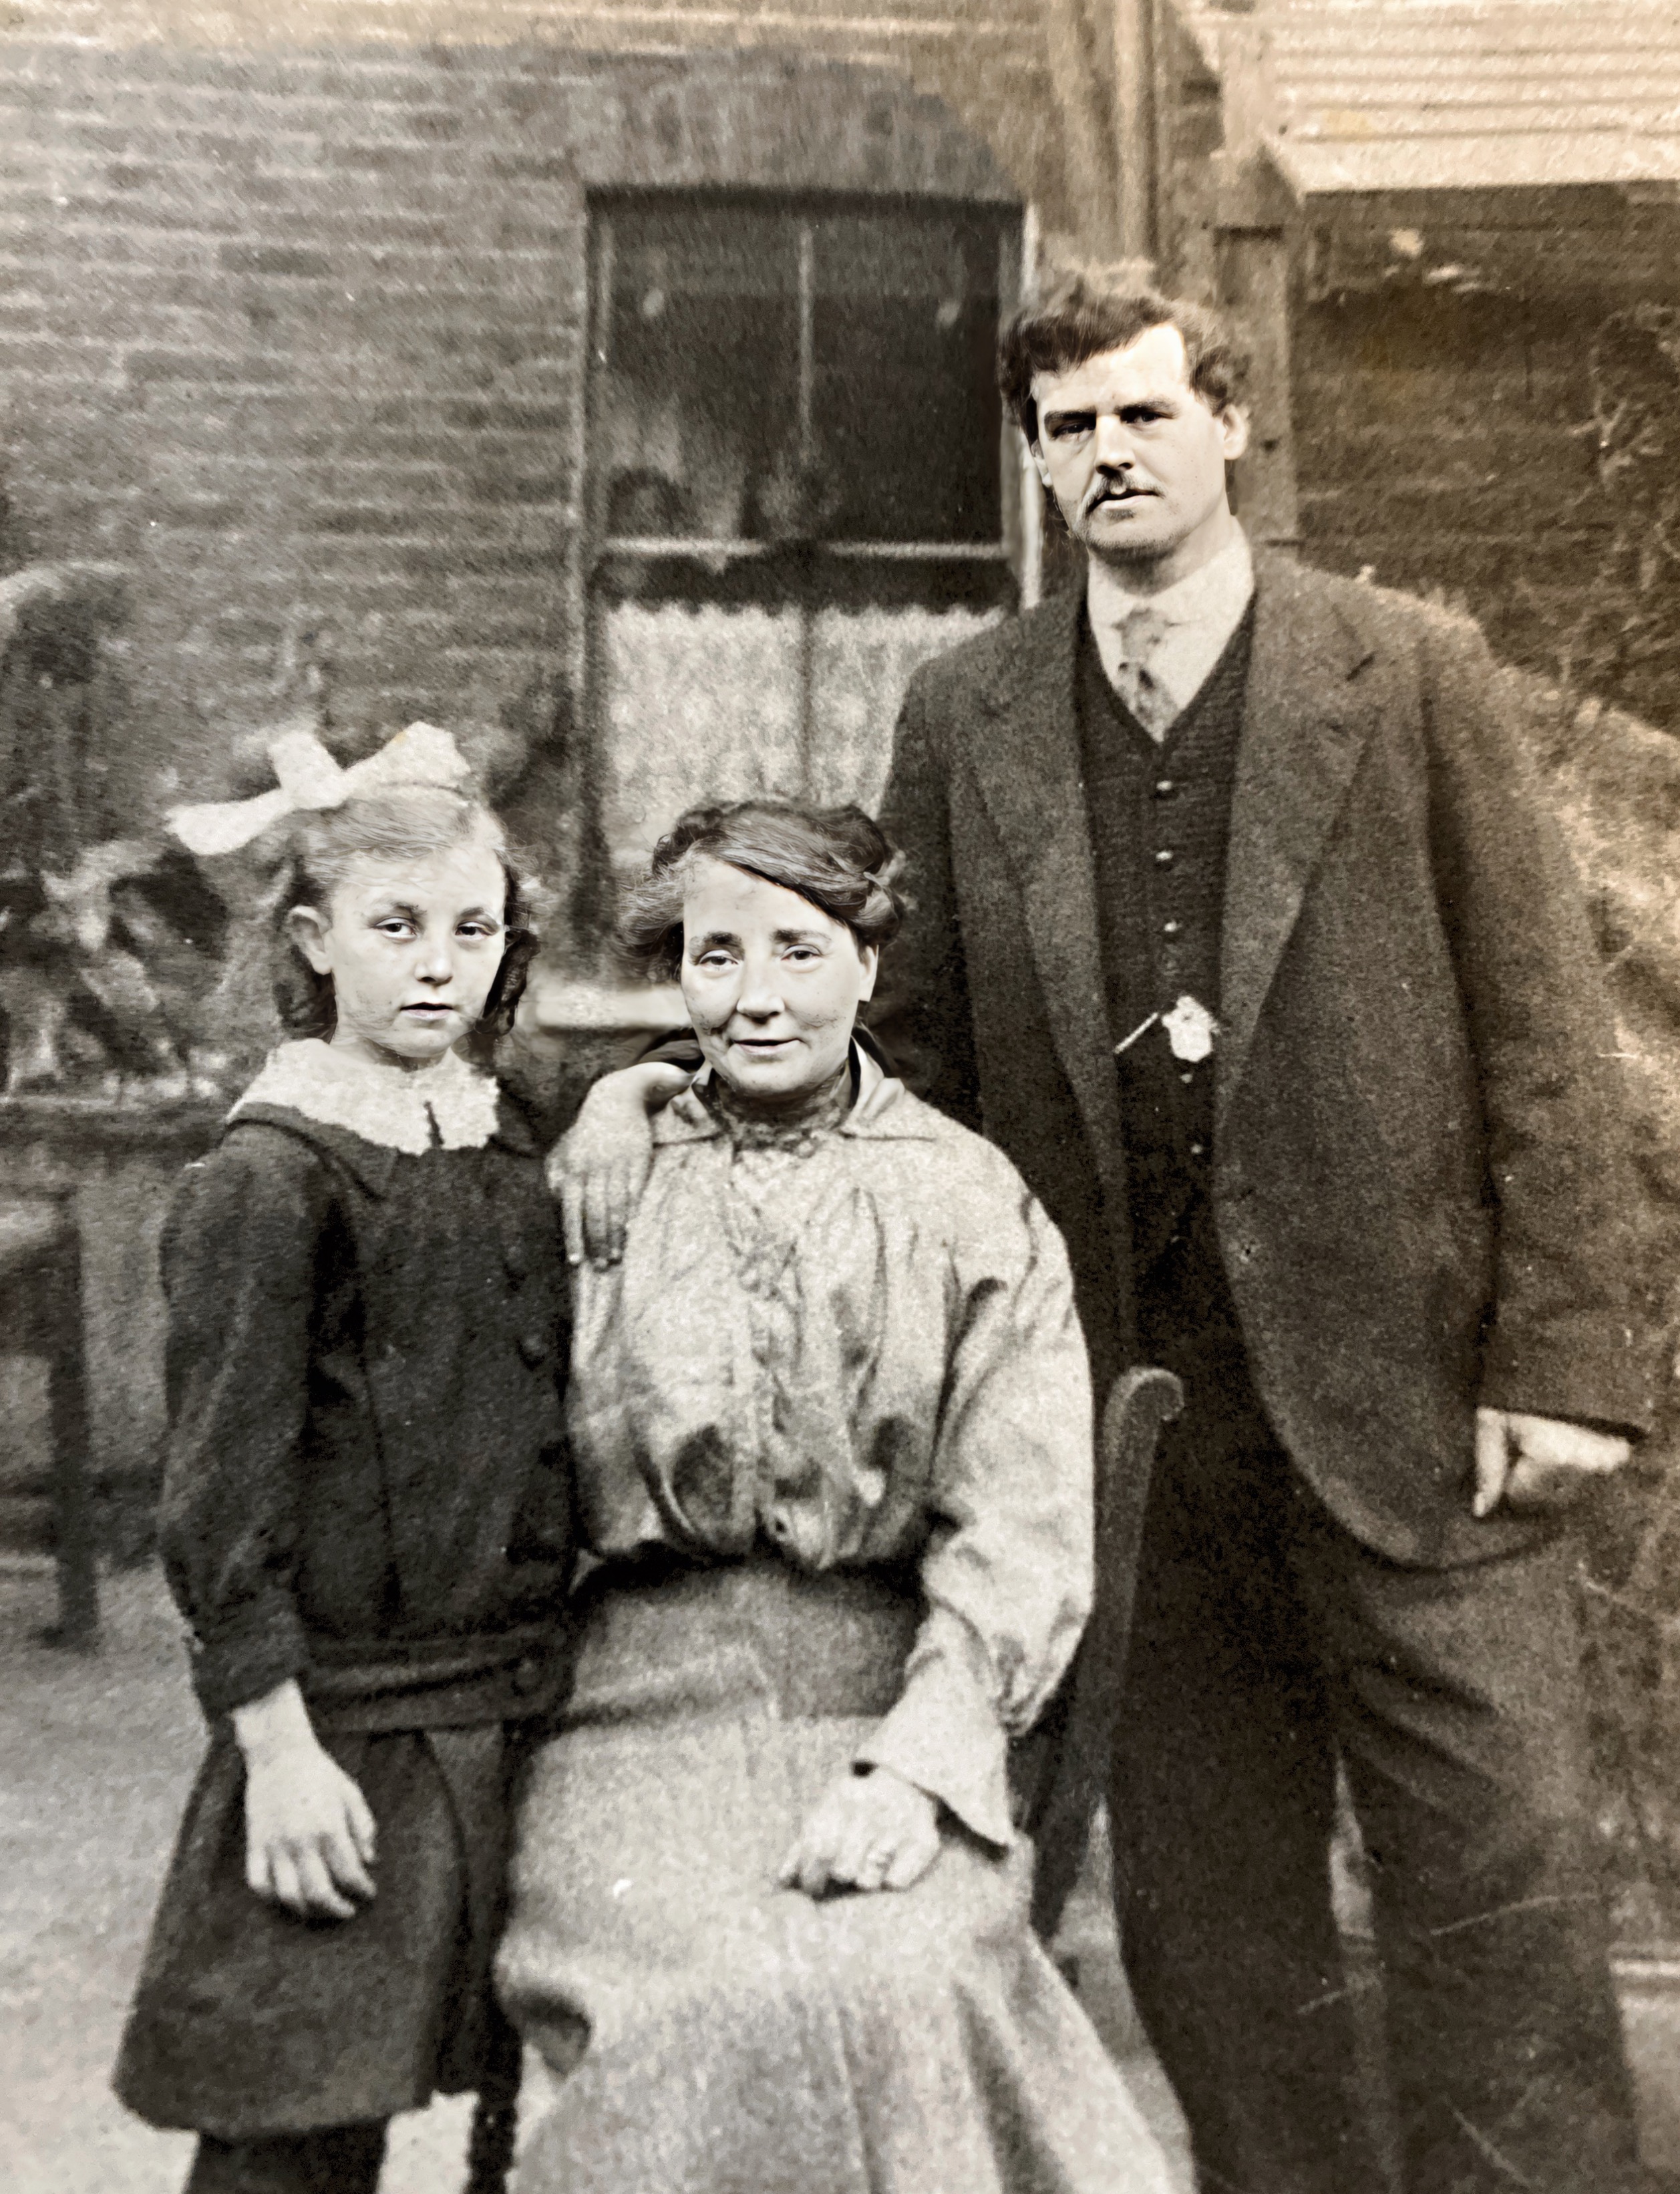 John Christopher Dudley, his wife Ada and daughter Mabel. London England circa 1911